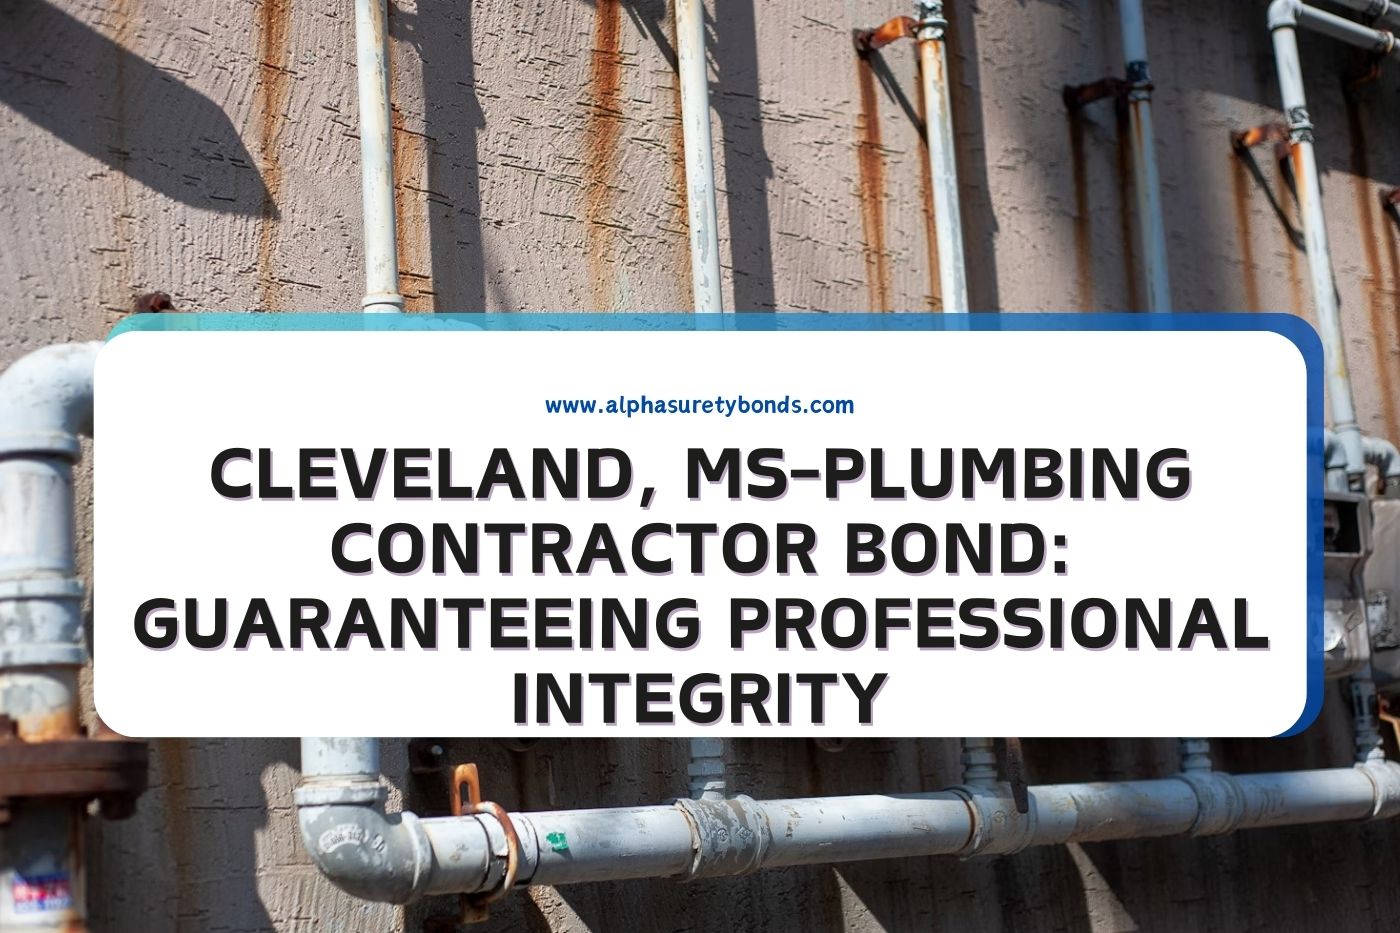 Cleveland, MS-Plumbing Contractor Bond: Guaranteeing Professional Integrity